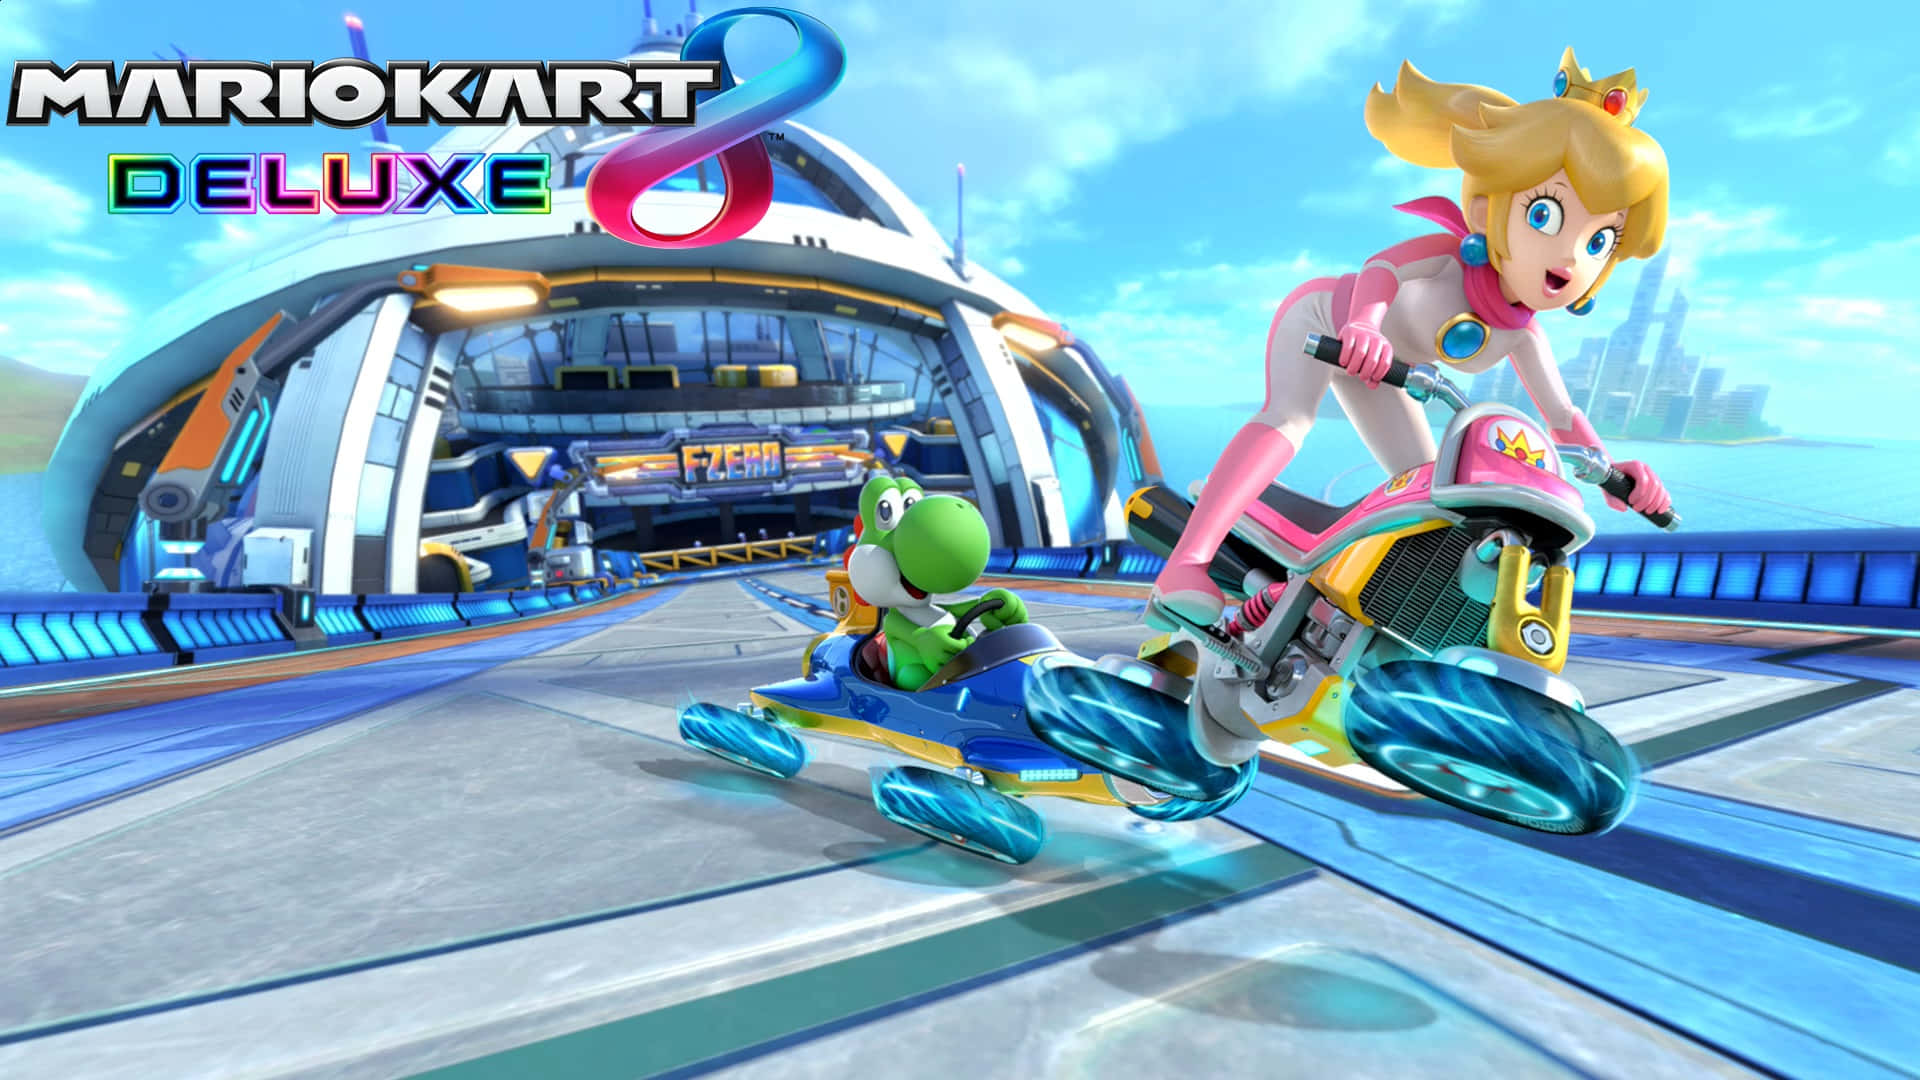 Thrilling Mario Kart 8 Deluxe Race with Iconic Characters Wallpaper